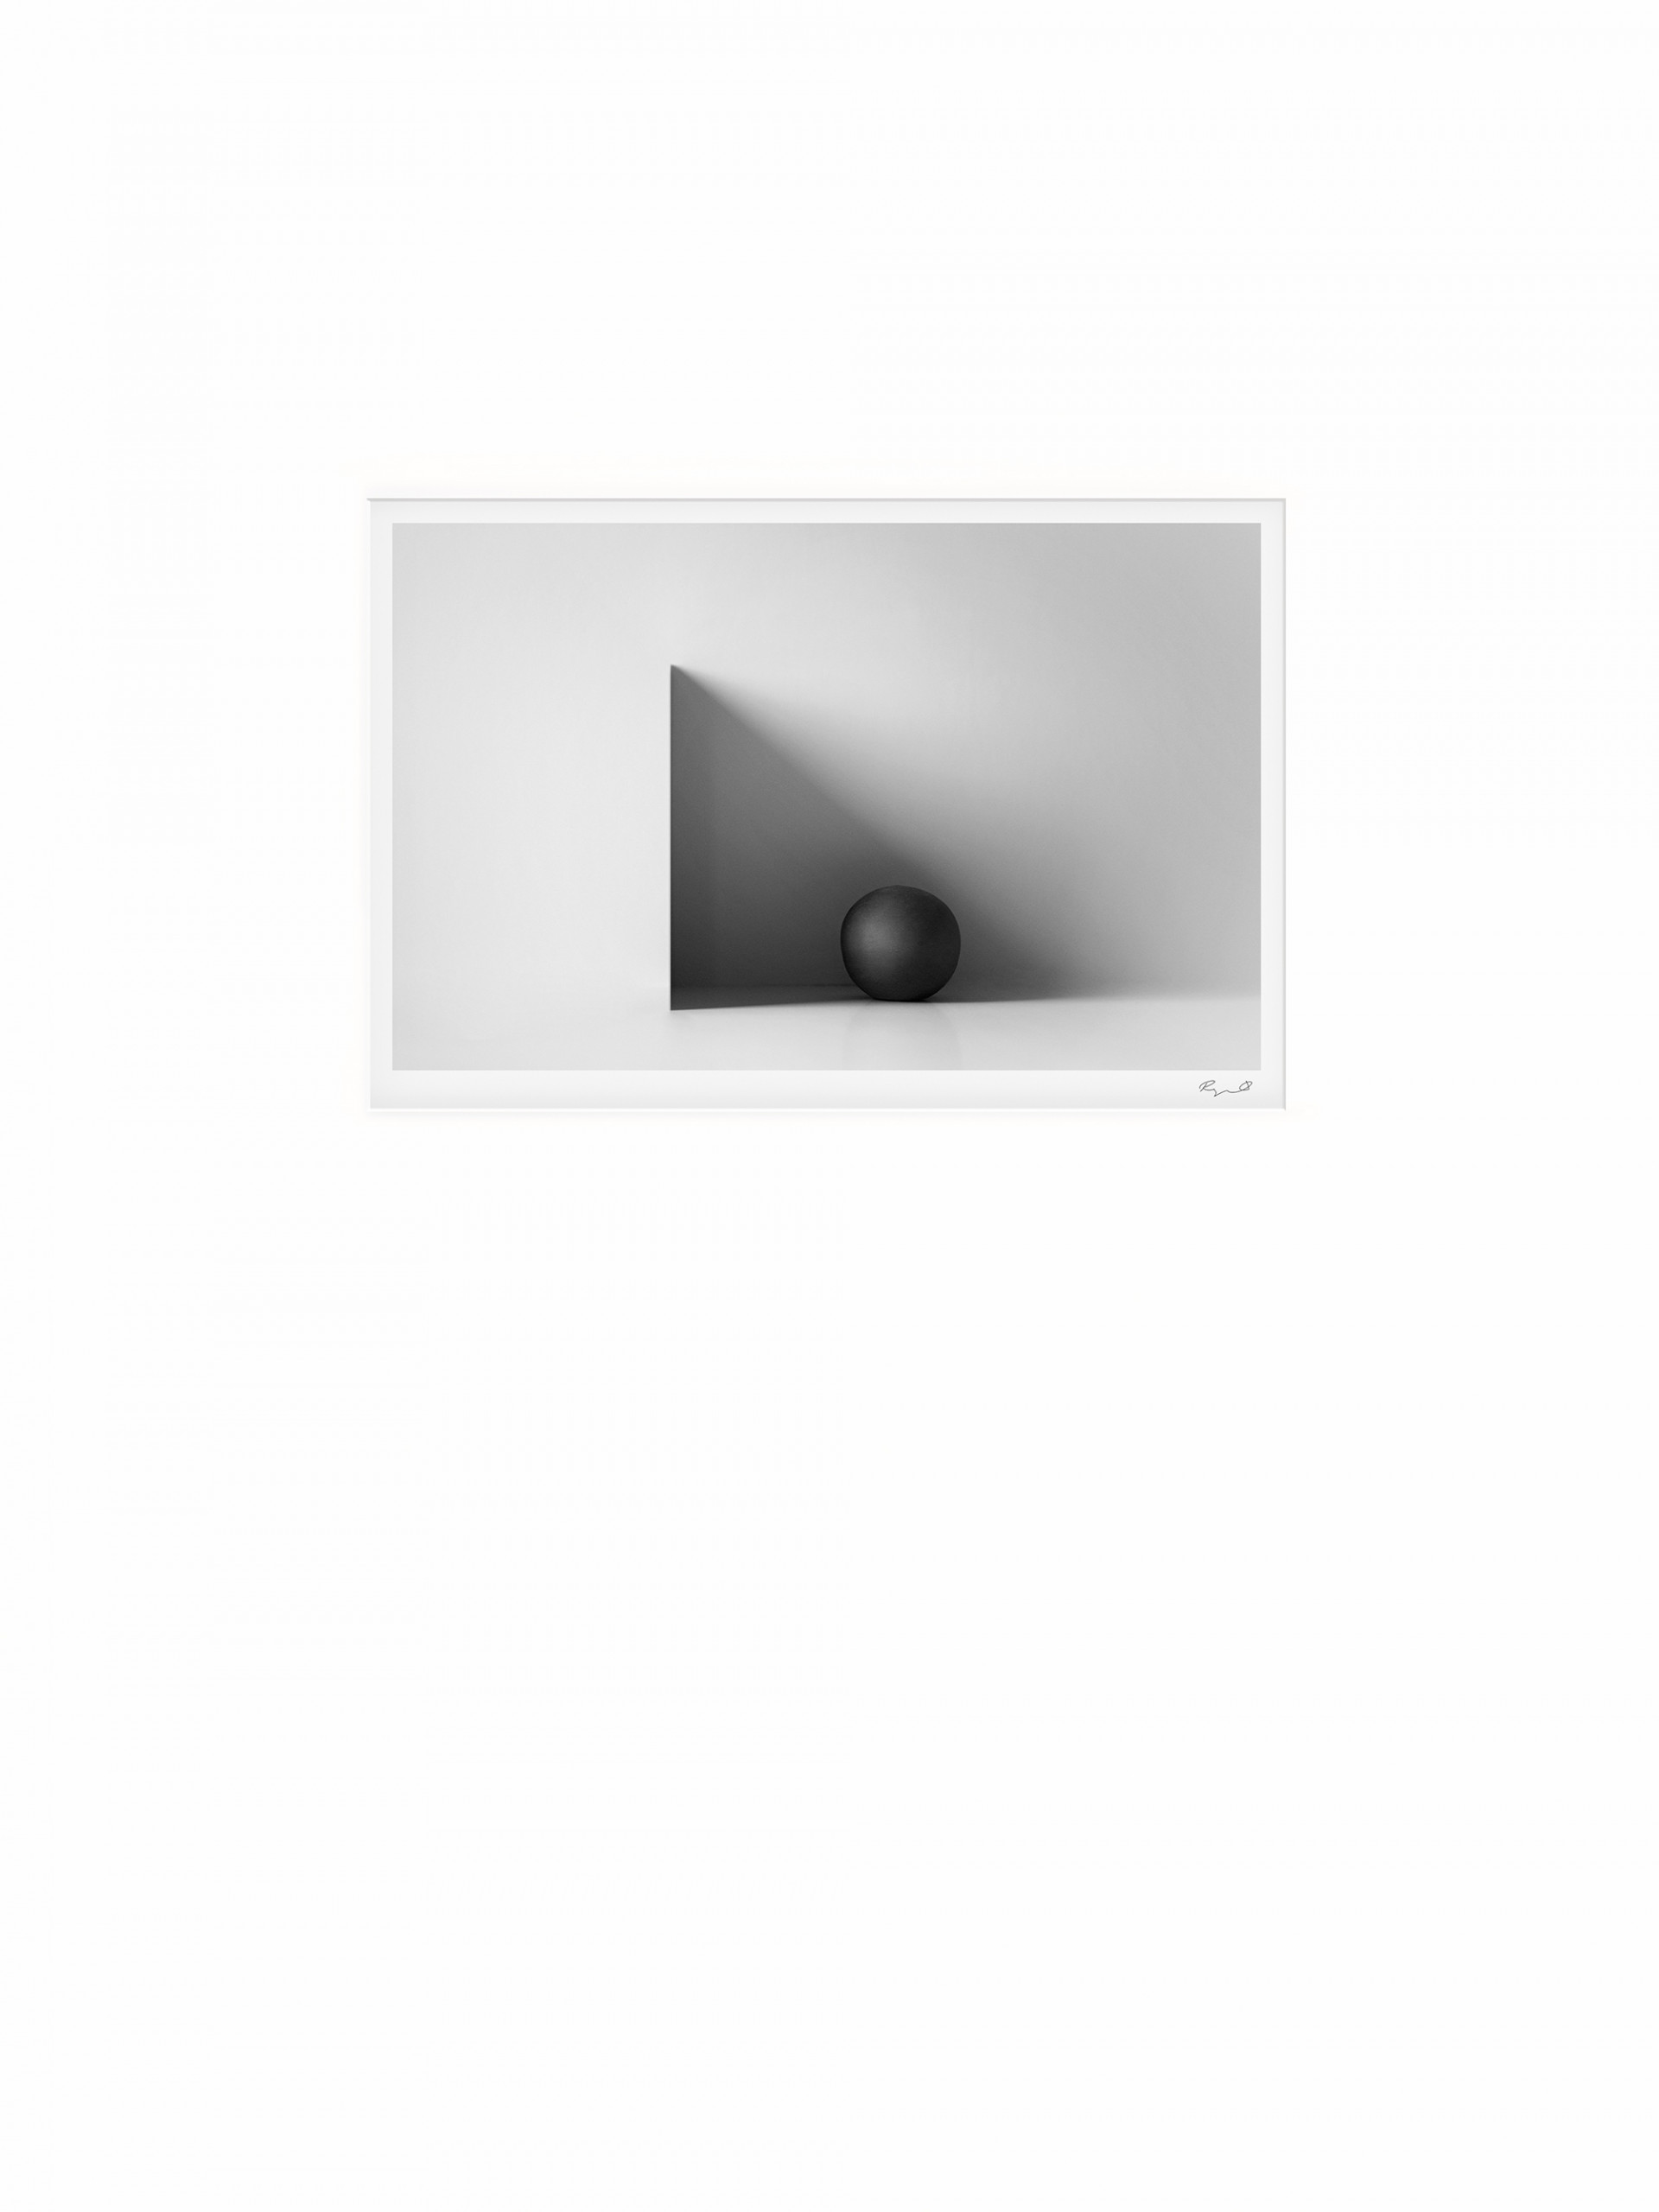 Shadow by artist Ragnar Ómarsson. Limited Edition print, signed and numbered.